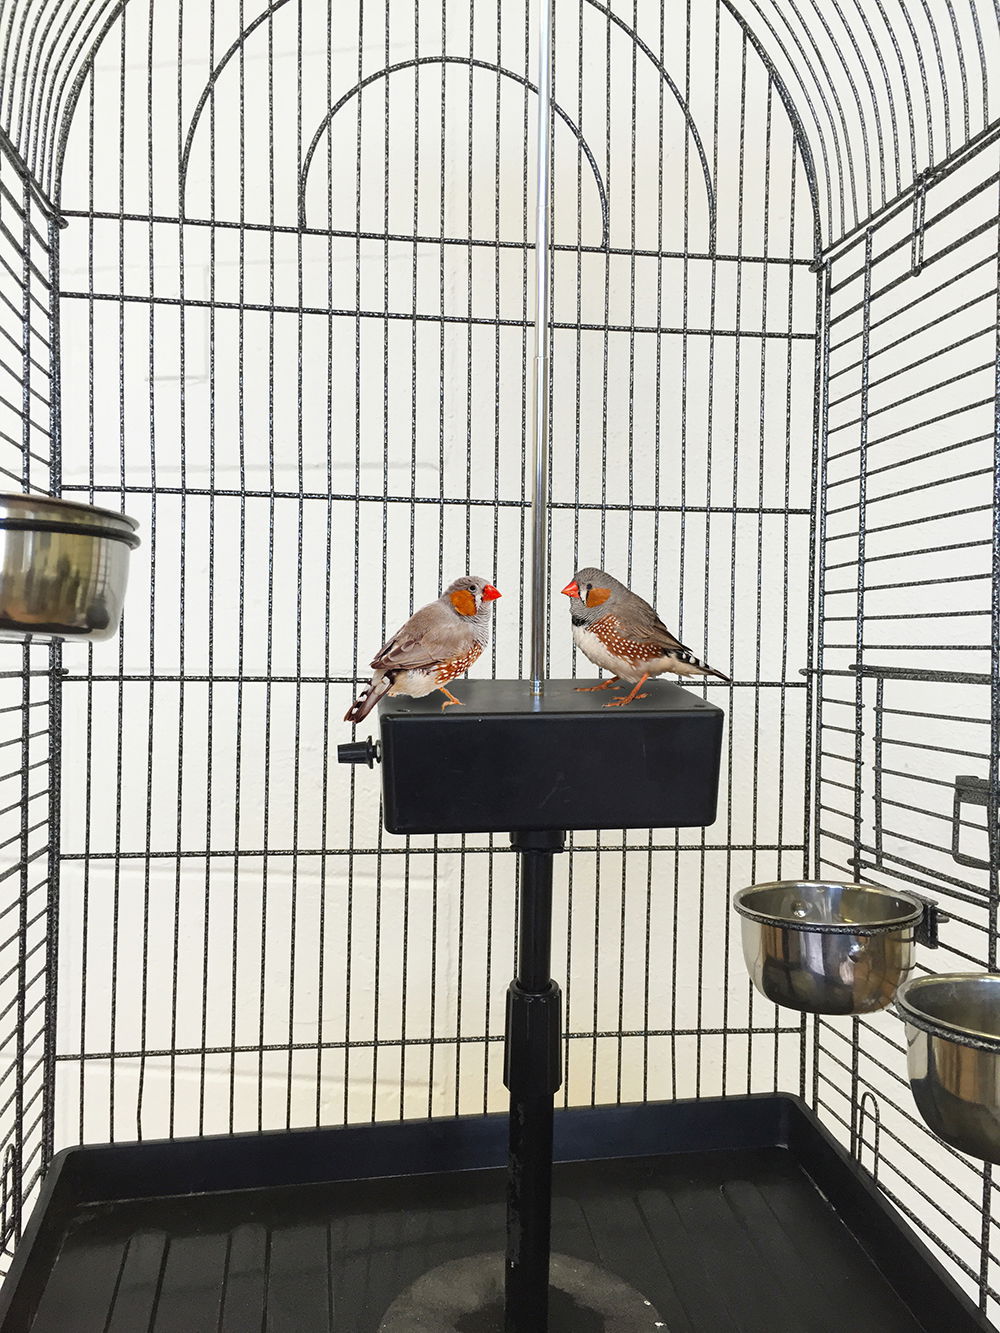 While Contemplating Their Fate in the Stars, the Twins Surround the Enemy, Installation with two finches, cage and theremin, 2003